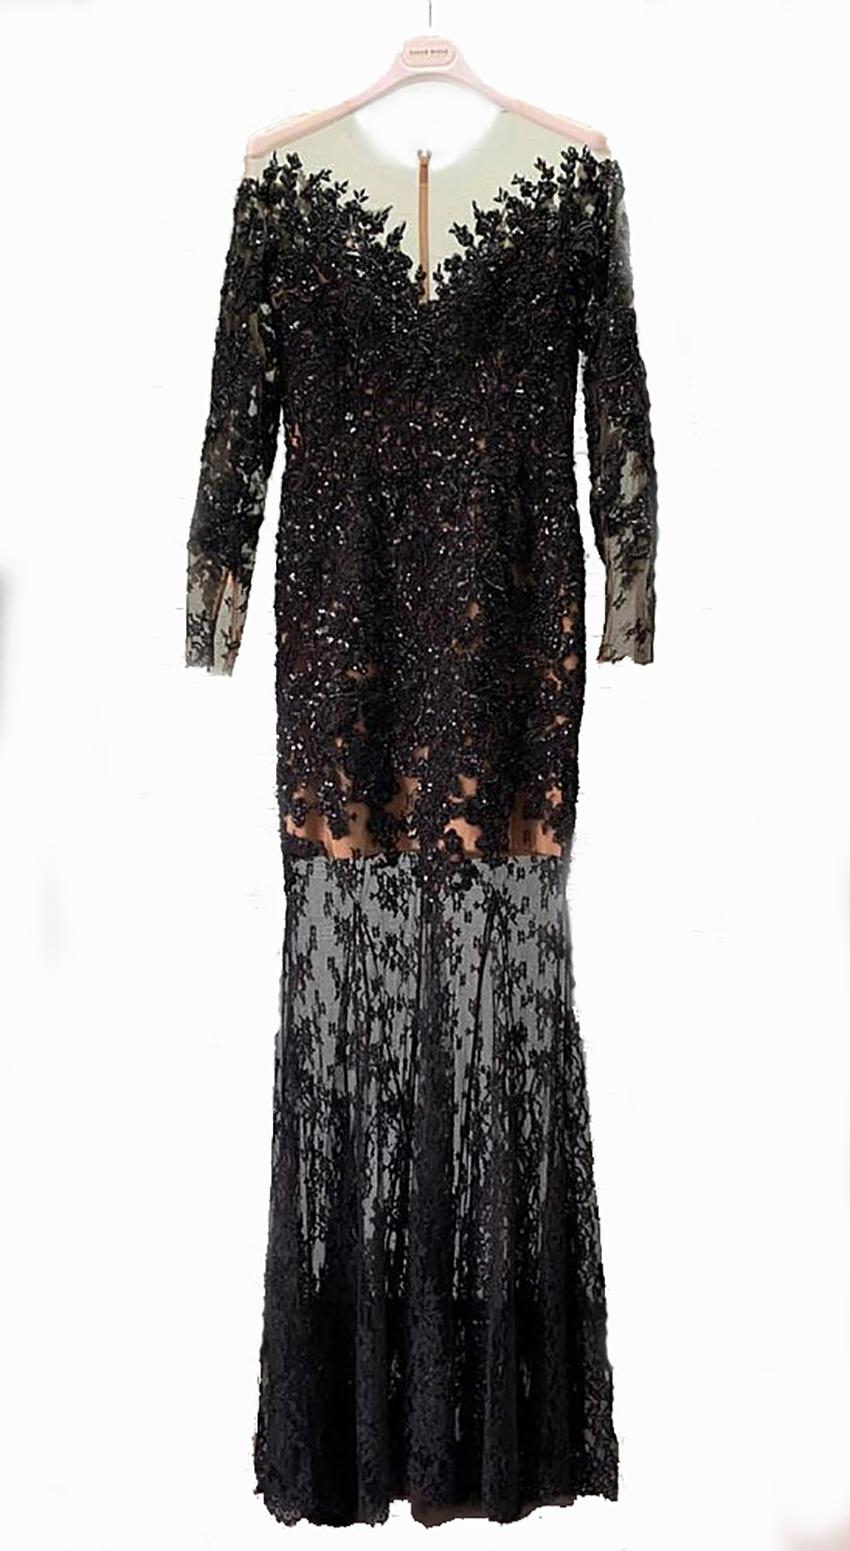 ZUHAIR MURAD


Embellished Black Lace Dress
Long Sleeves
Back Zipper
Beige Petticoat

Size IT 40 - US 4

Brand new, with tags!

 100% authentic guarantee 

       PLEASE VISIT OUR STORE FOR MORE GREAT ITEMS 




roo